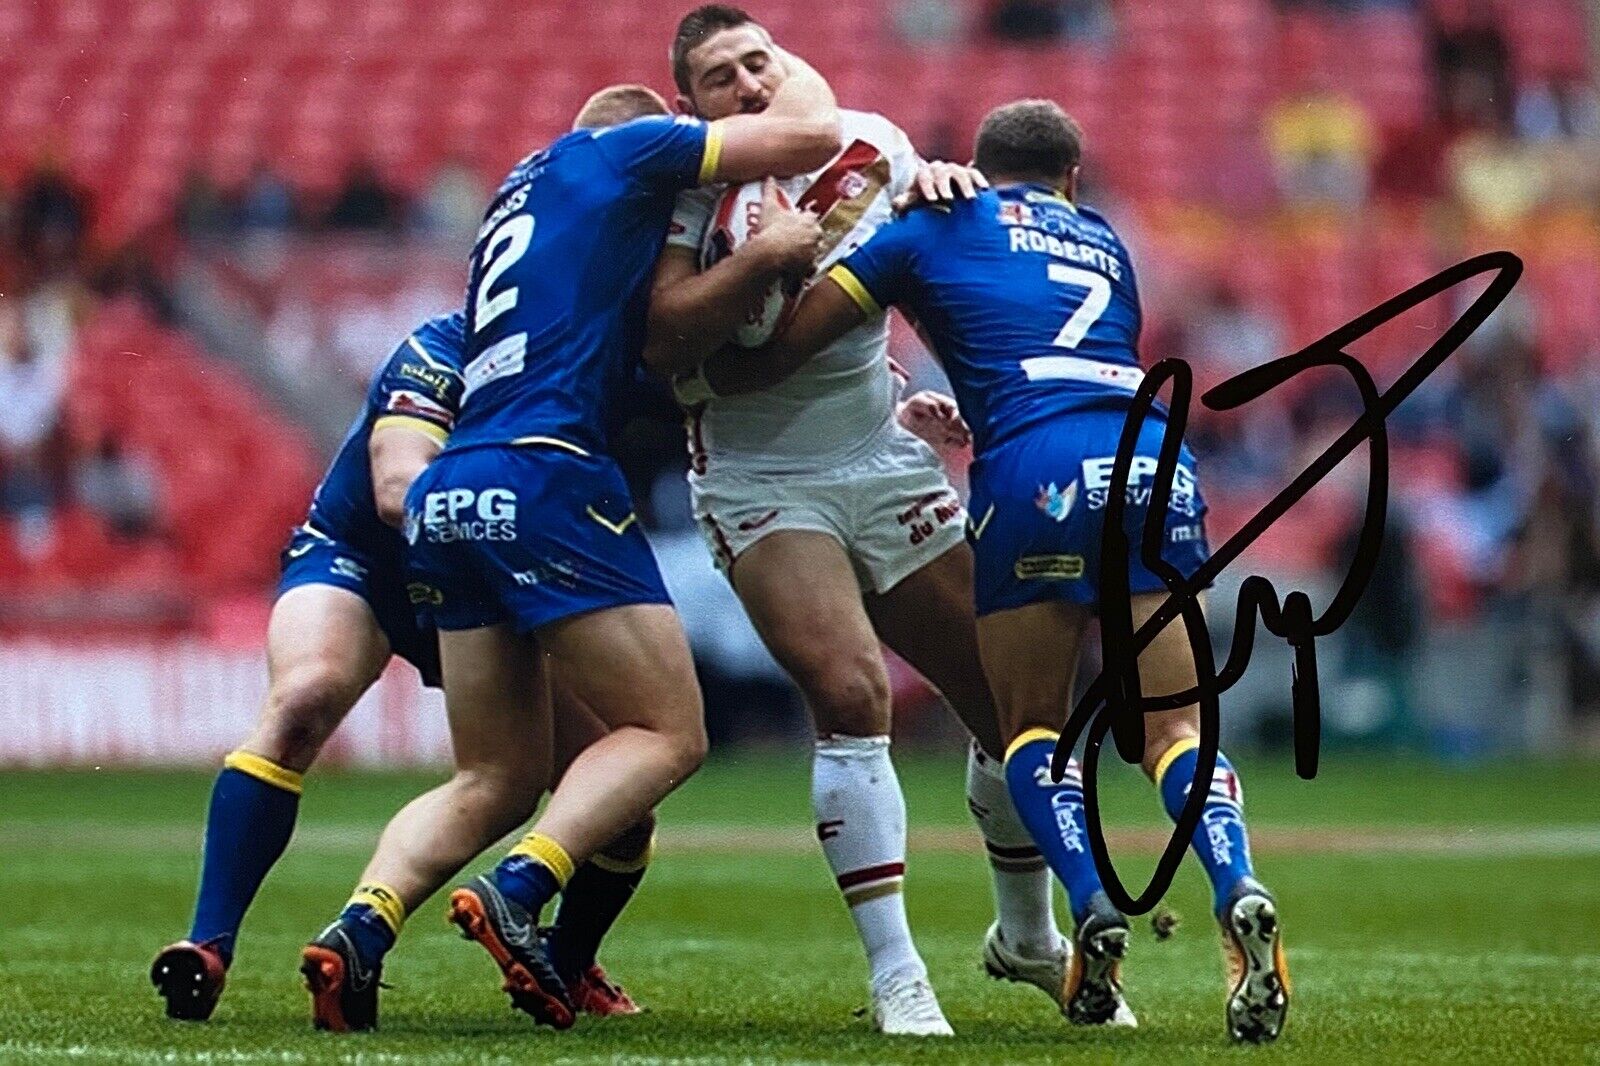 Julian Bousquet Genuine Hand Signed 6X4 Photo Poster painting - Catalans Dragons 2